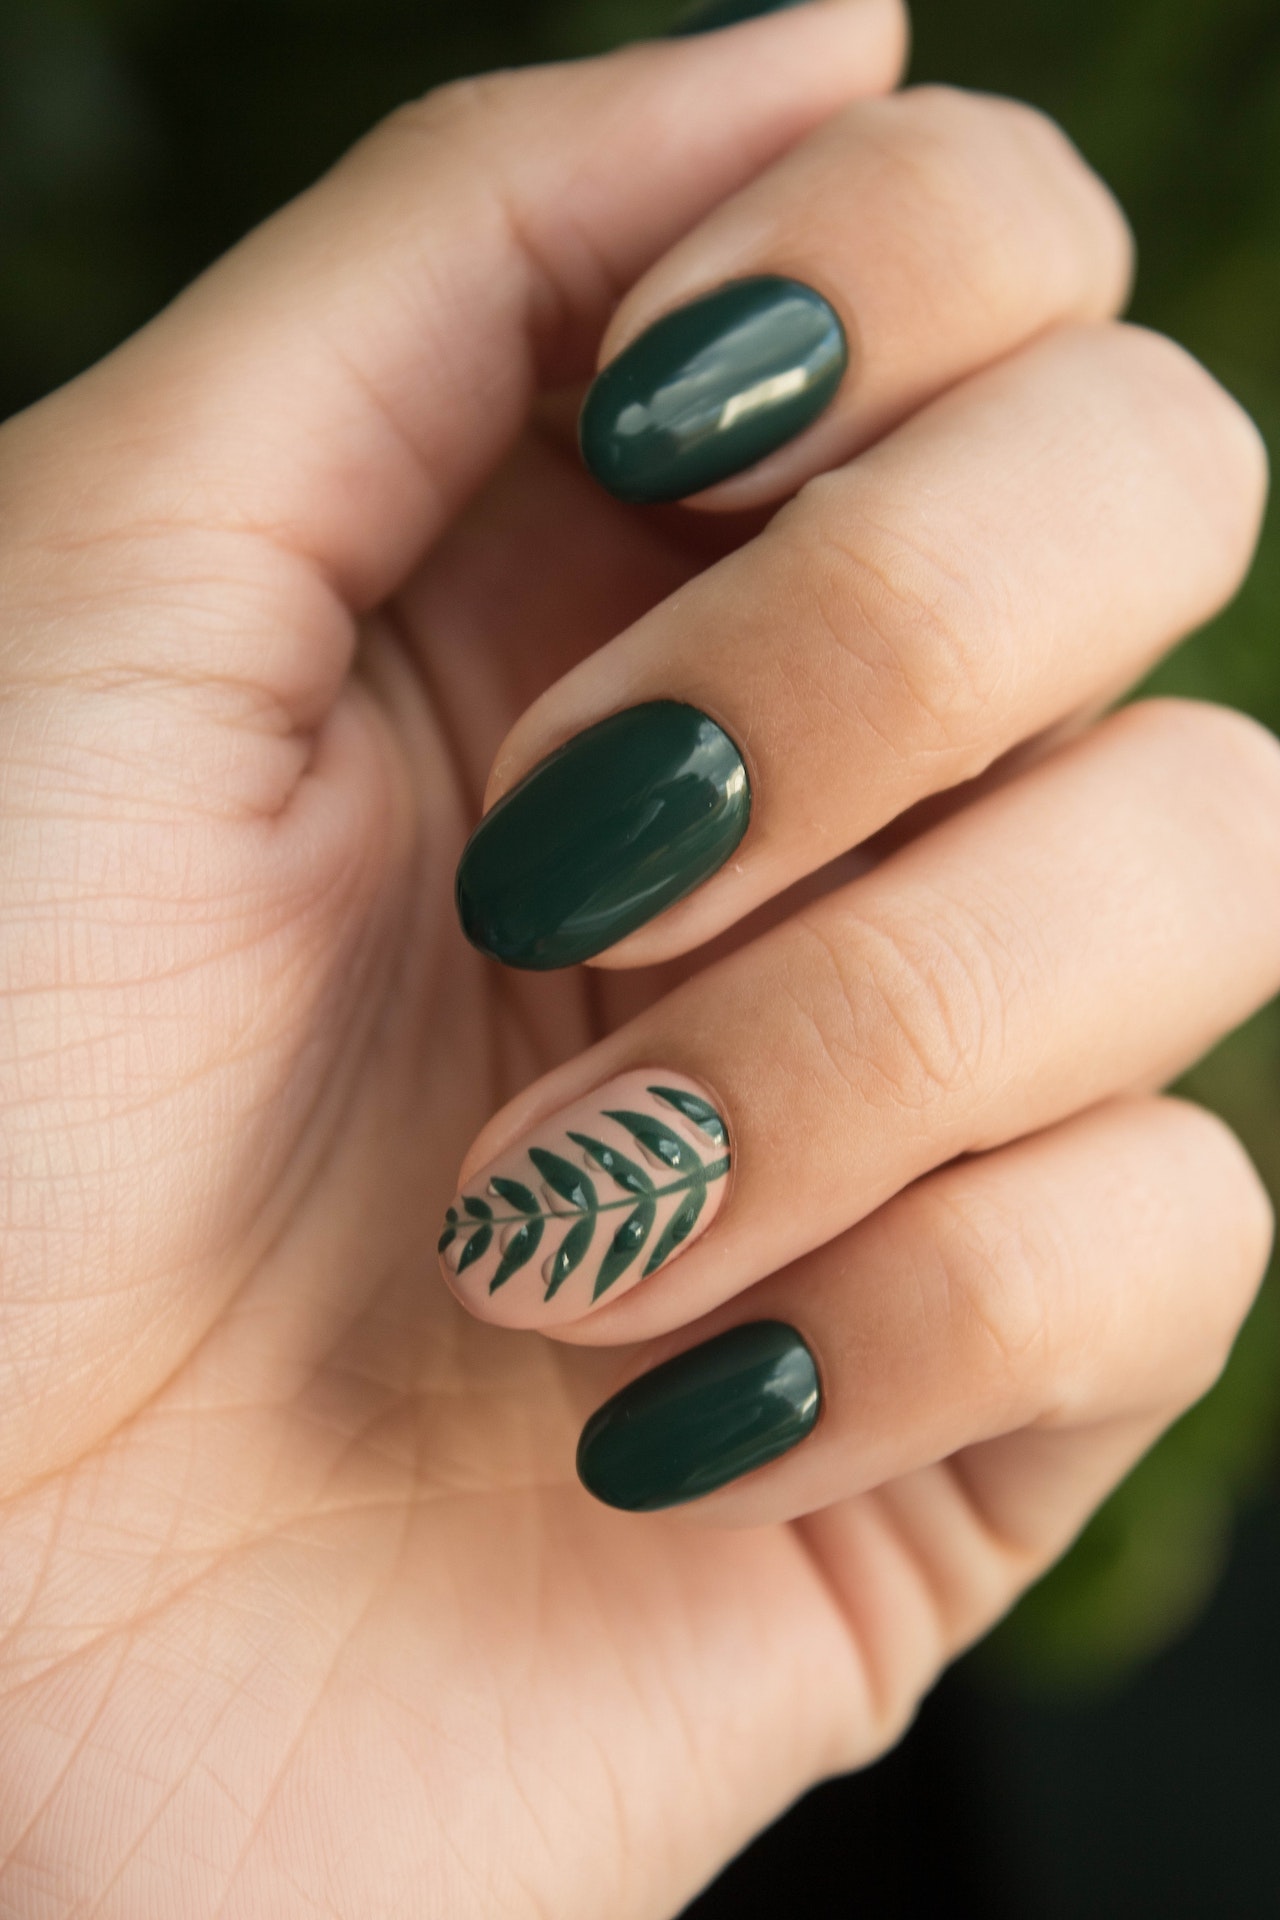 Tips and Tricks to Help You Stamp Nail Art Perfectly